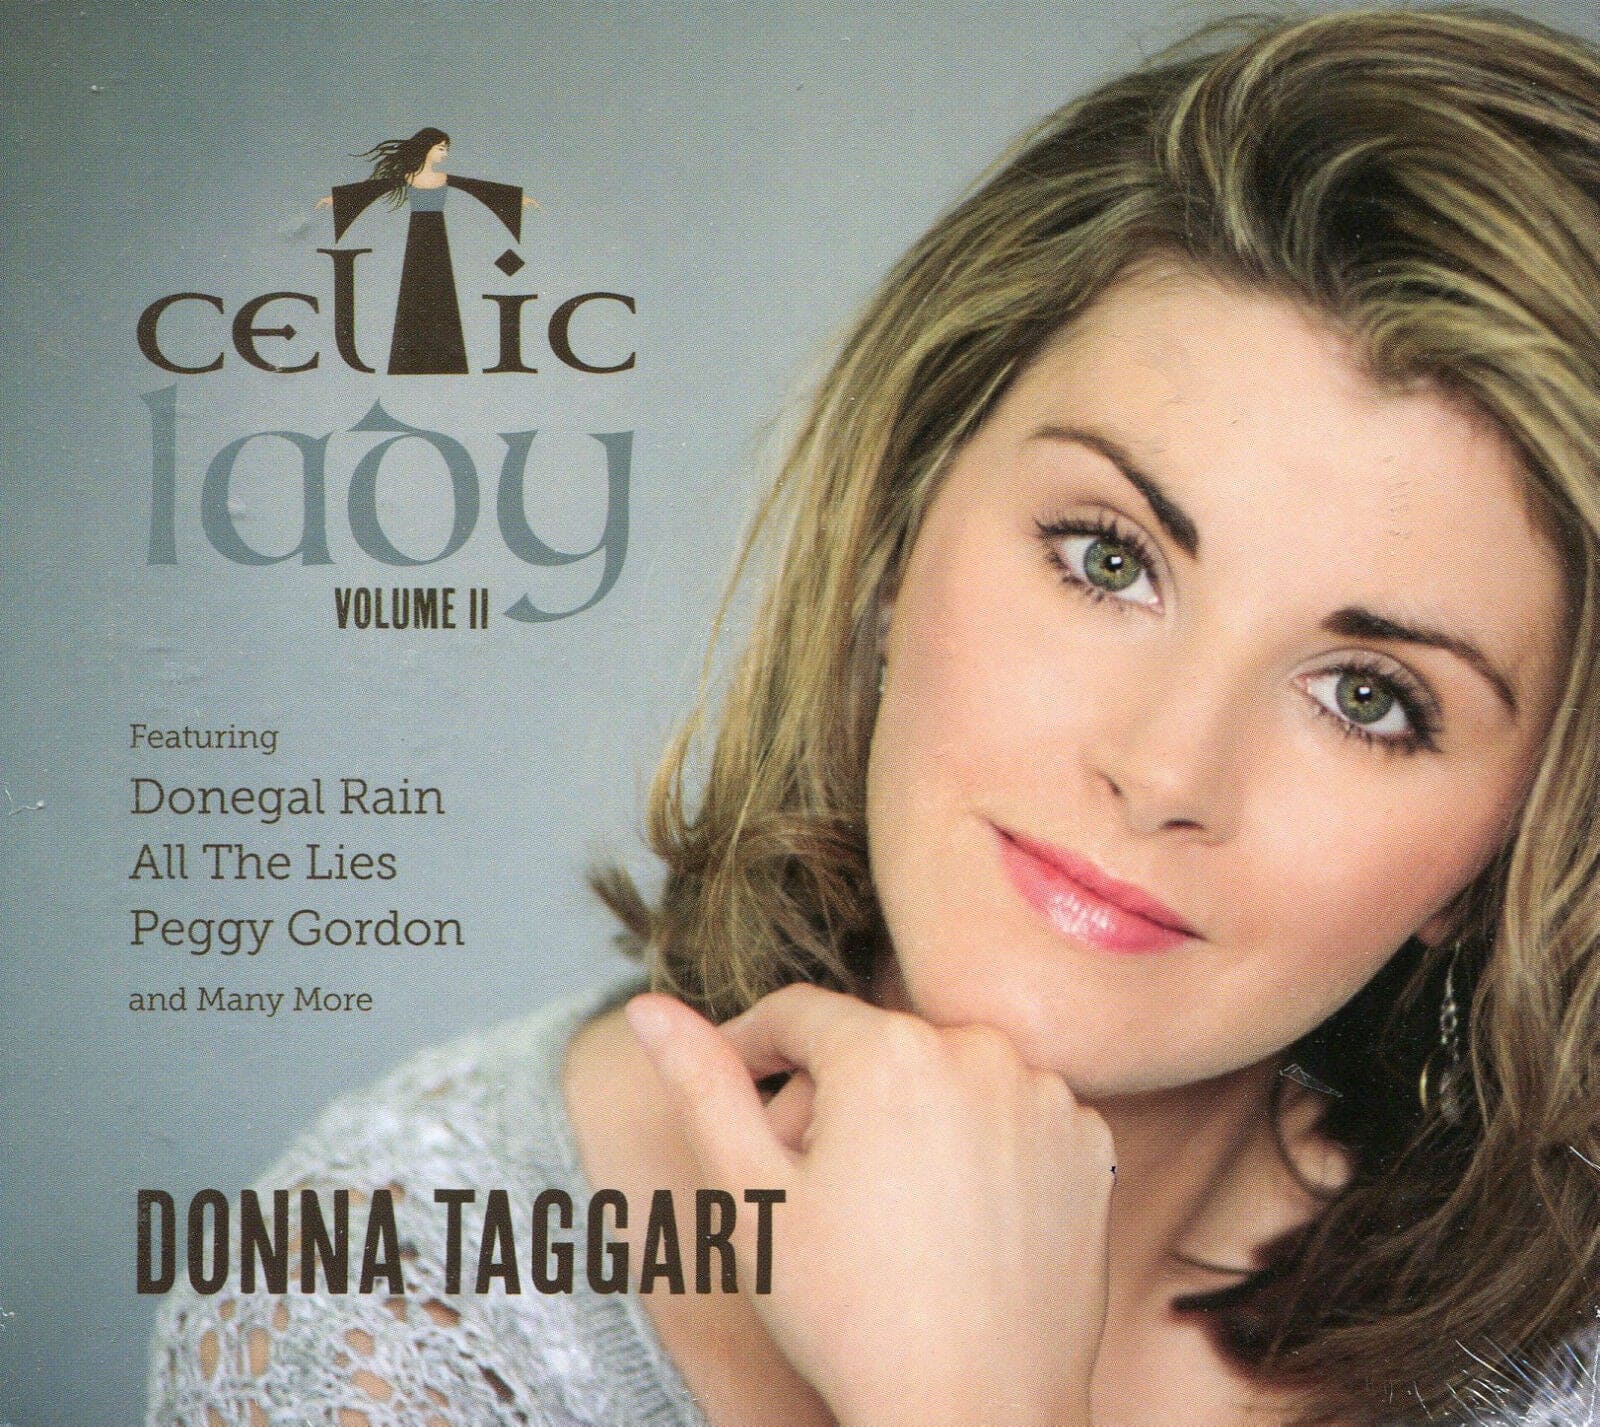 Celtic Lady Volume 2 - Donna Taggart [CD]